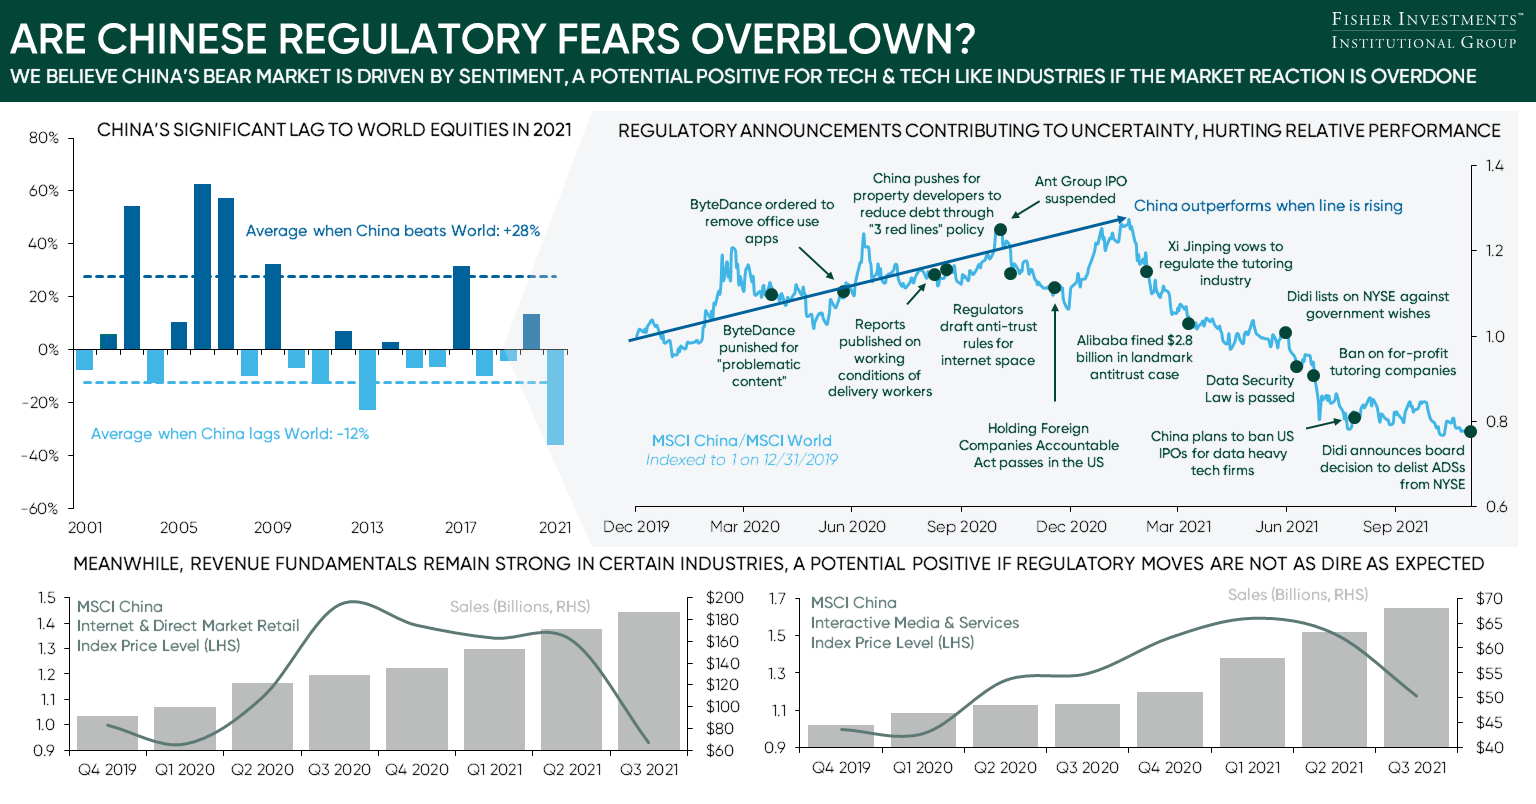 Are Chinese Regulatory Fears Overblown Infographic